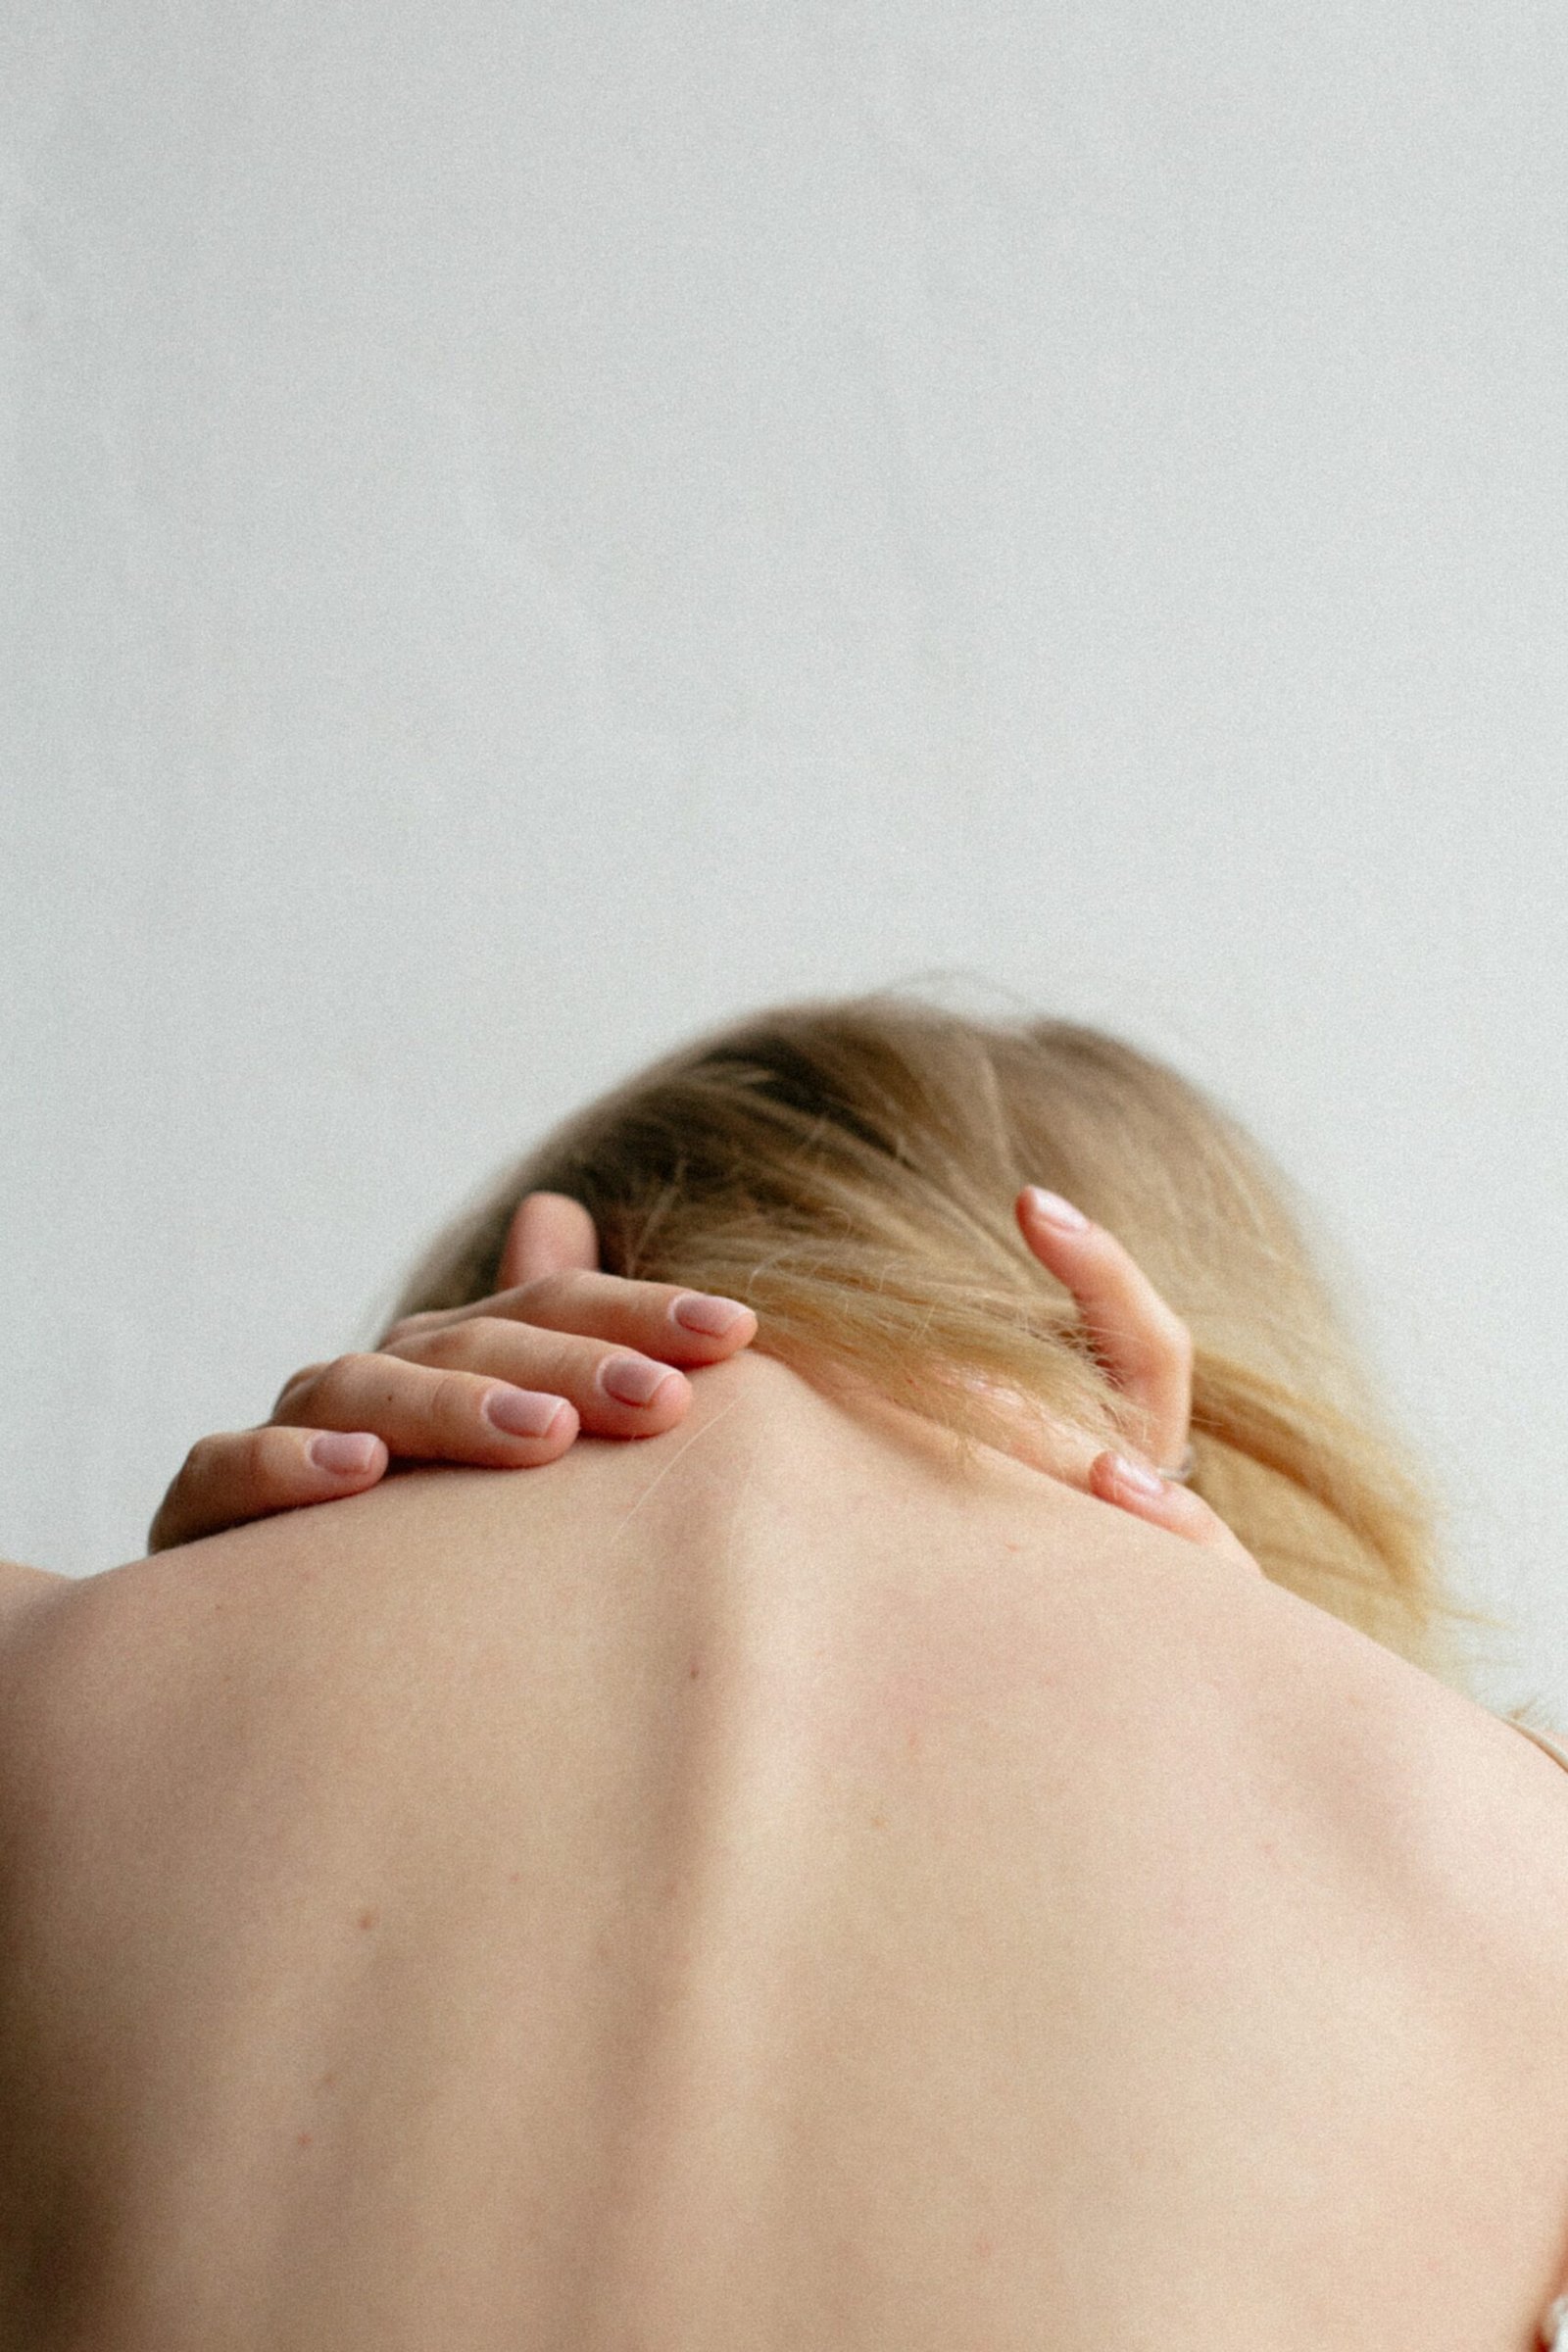 Woman's back bent over holding the back of her neck